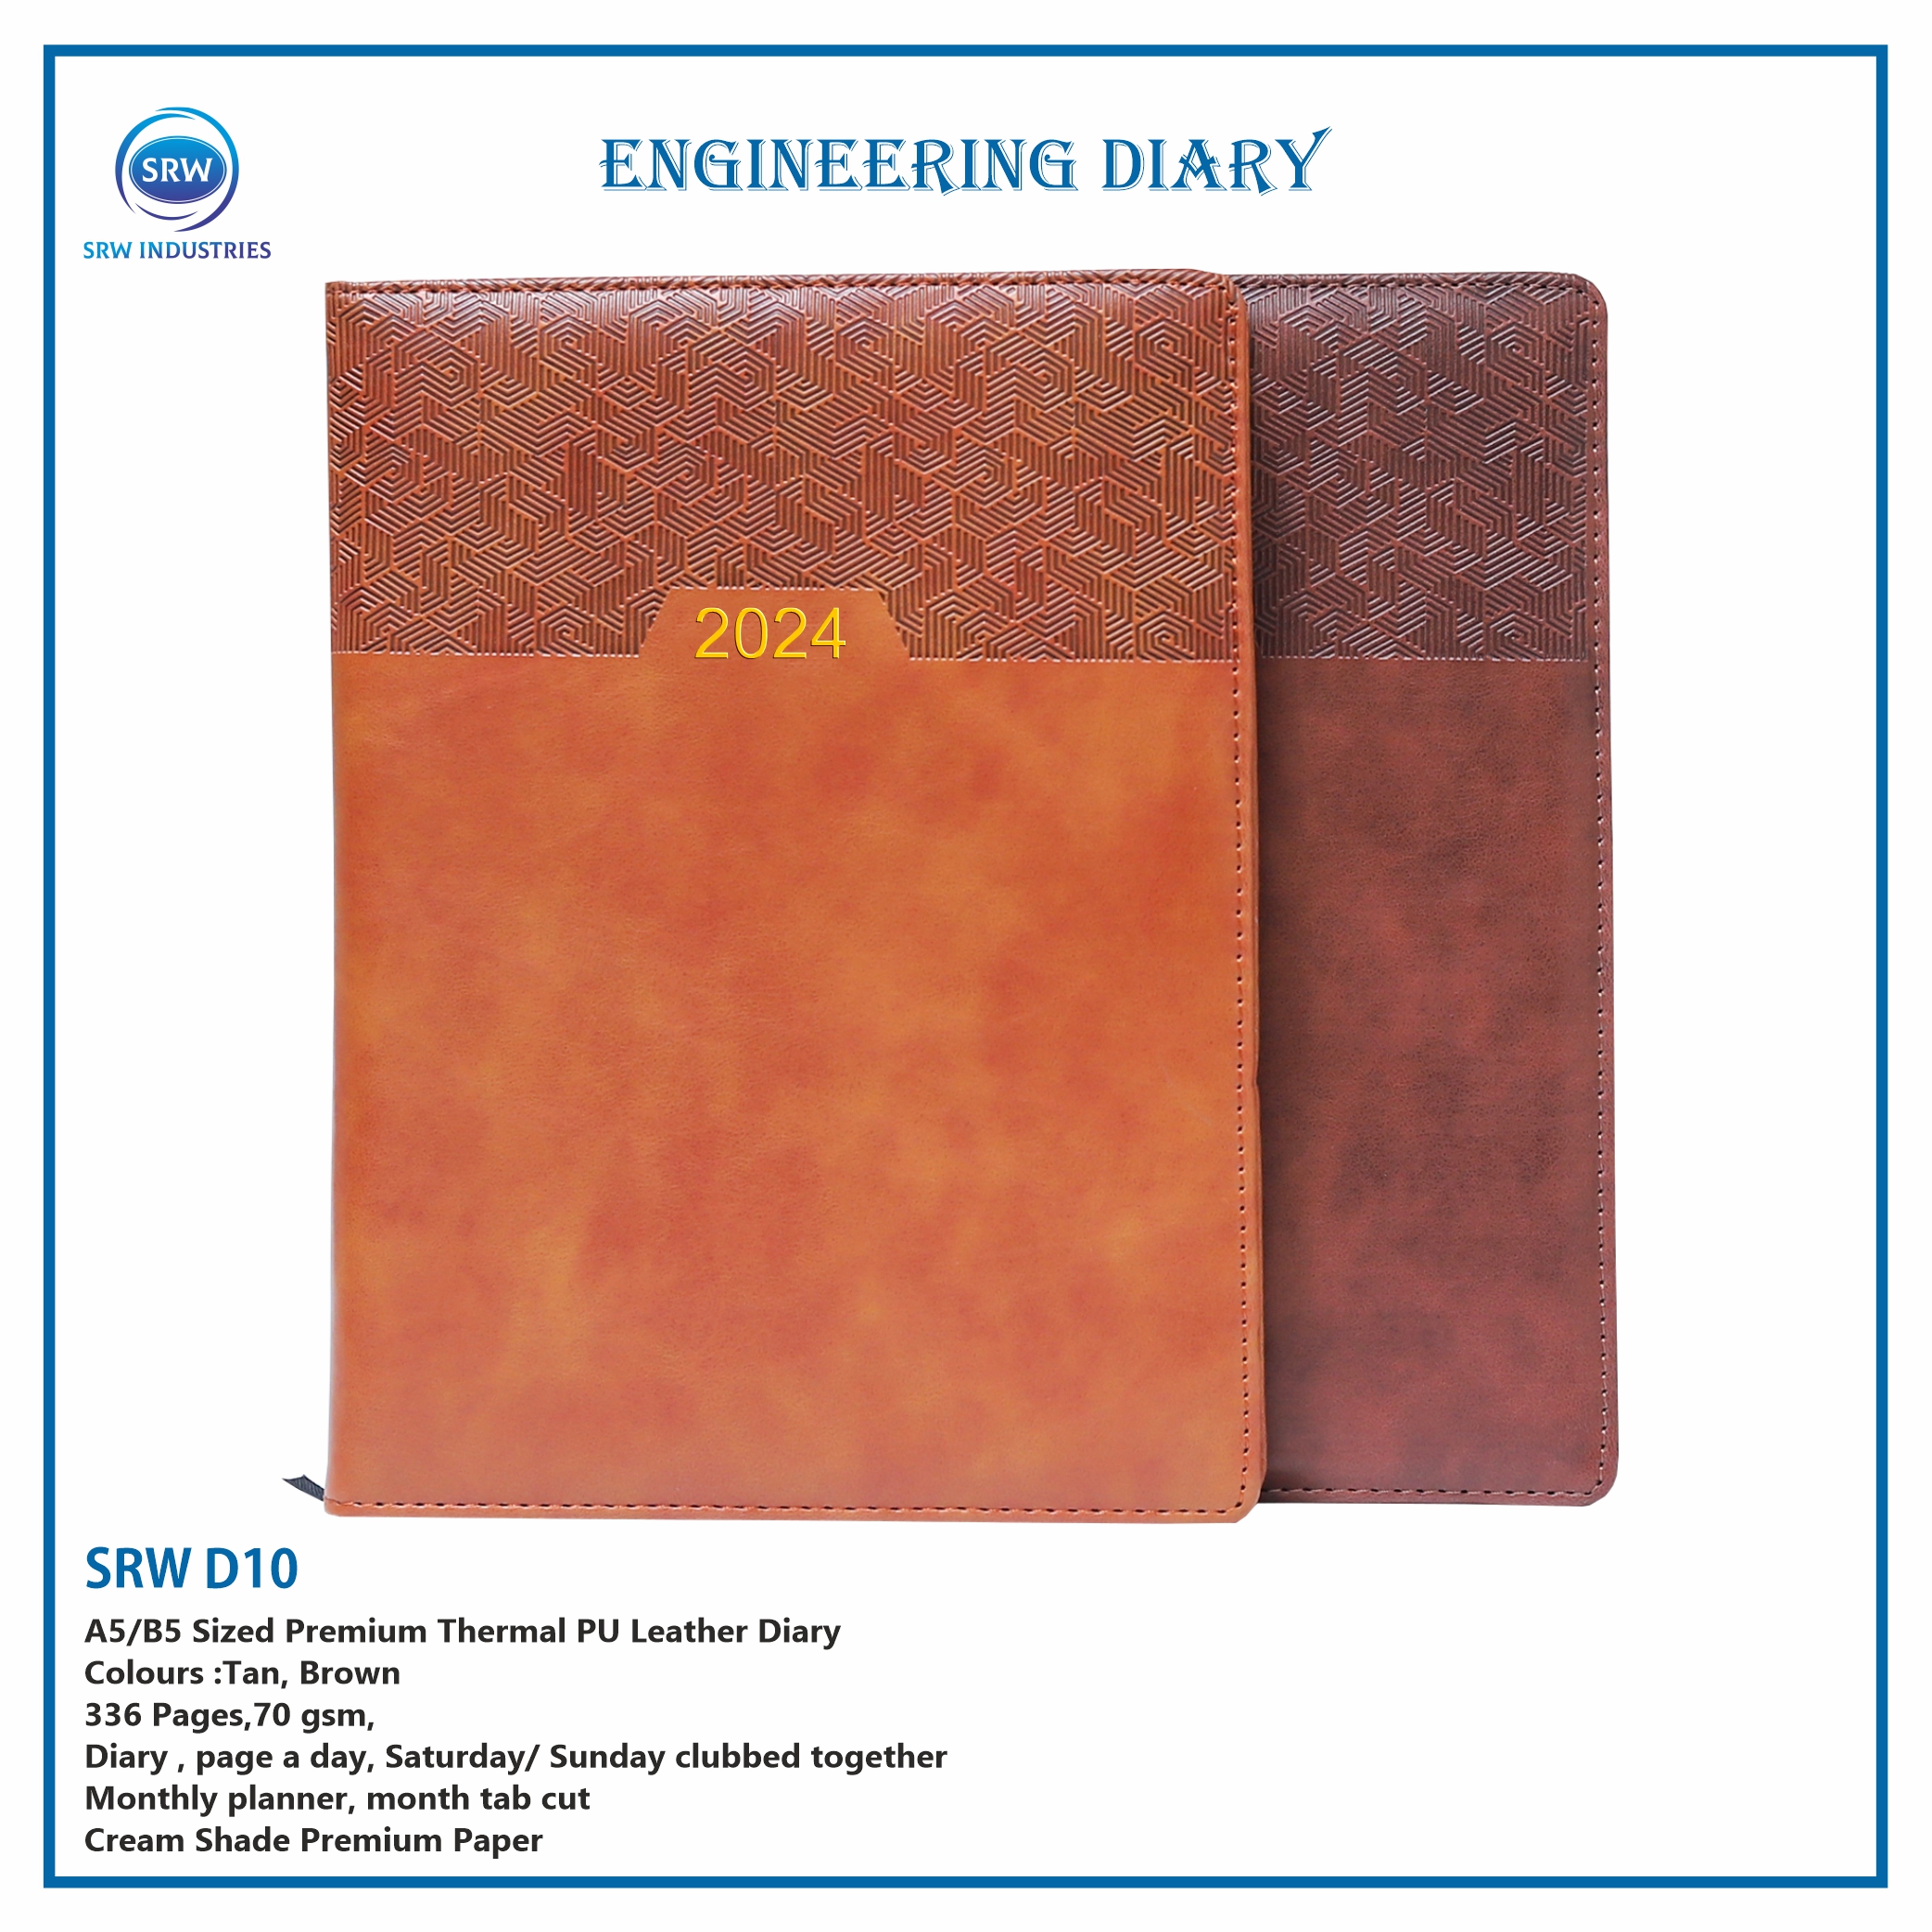 Engineering Diary Manufacturers in Pune